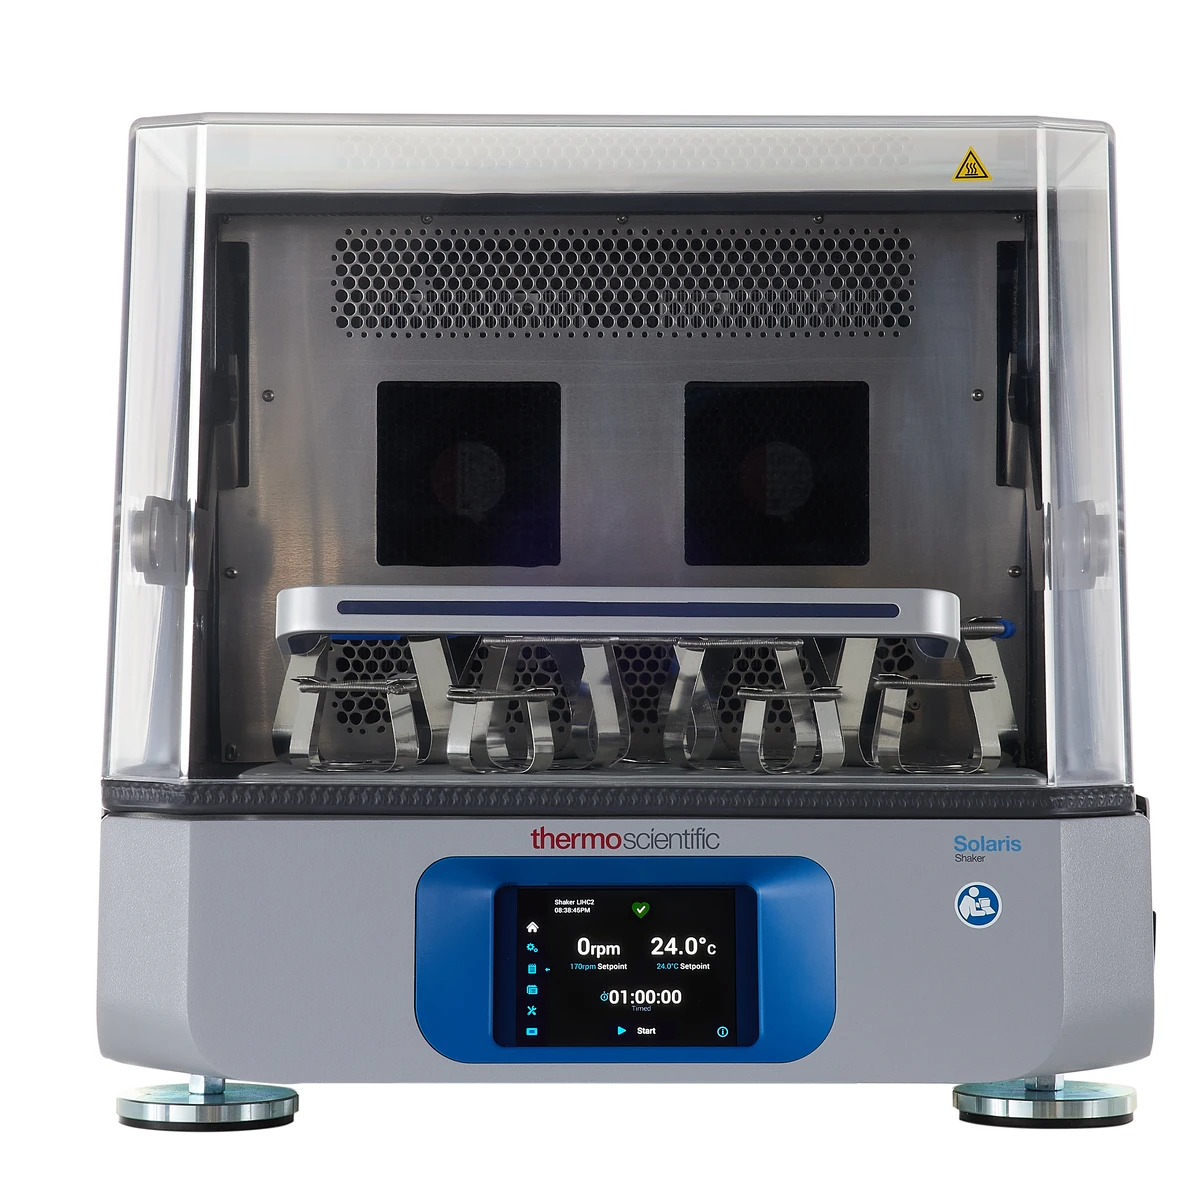 Thermo Scientific™ Solaris 4000 R Large Incubated and Refrigerated Benchtop Orbital Shaker